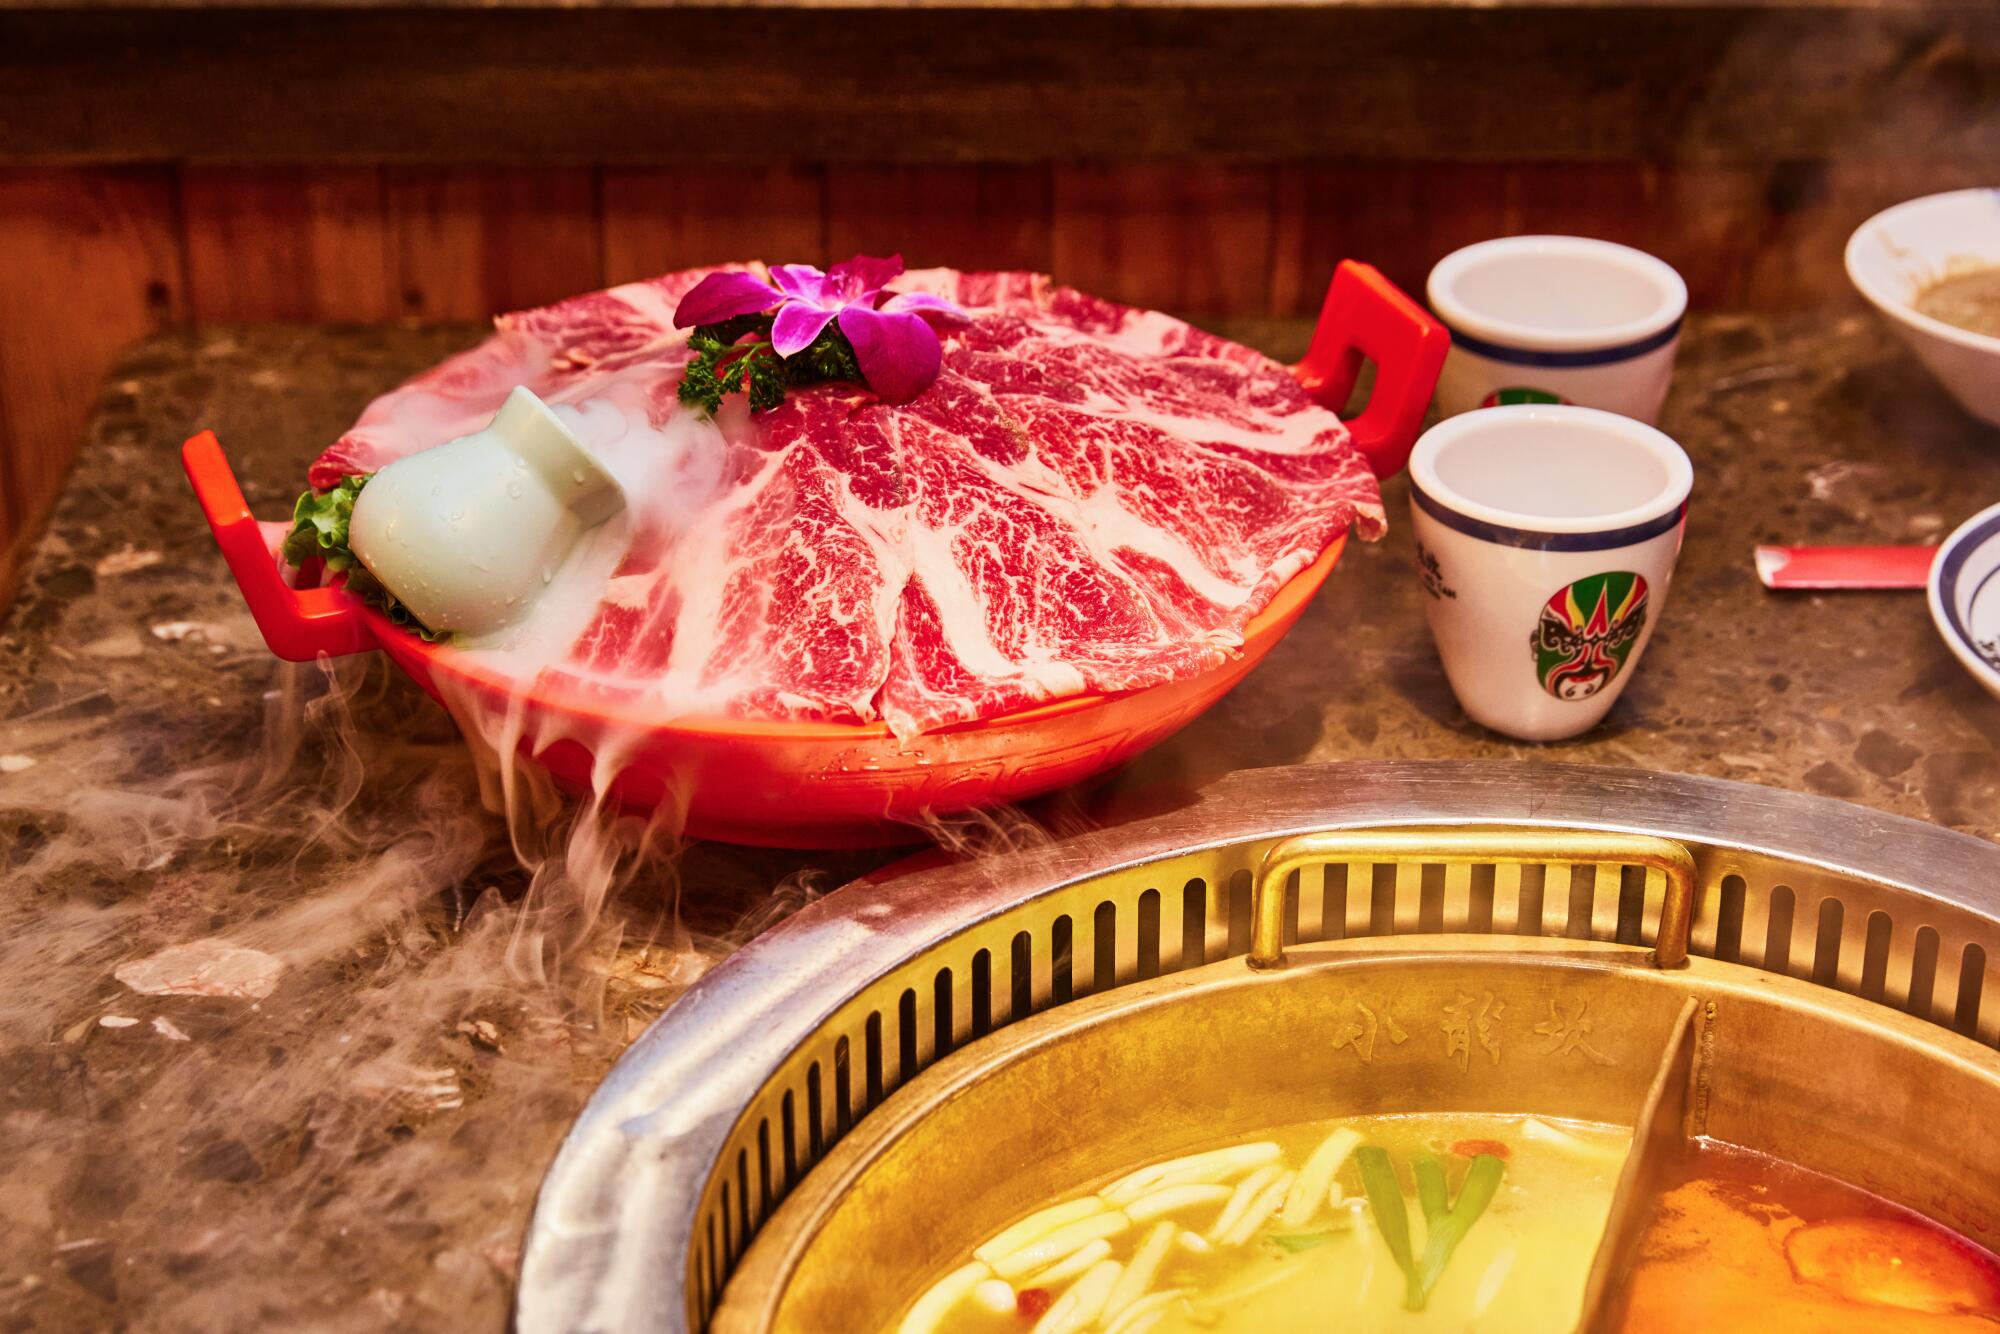 Thinly sliced Wagyu beef on a mound of ice next to a metal pot full of hot broth